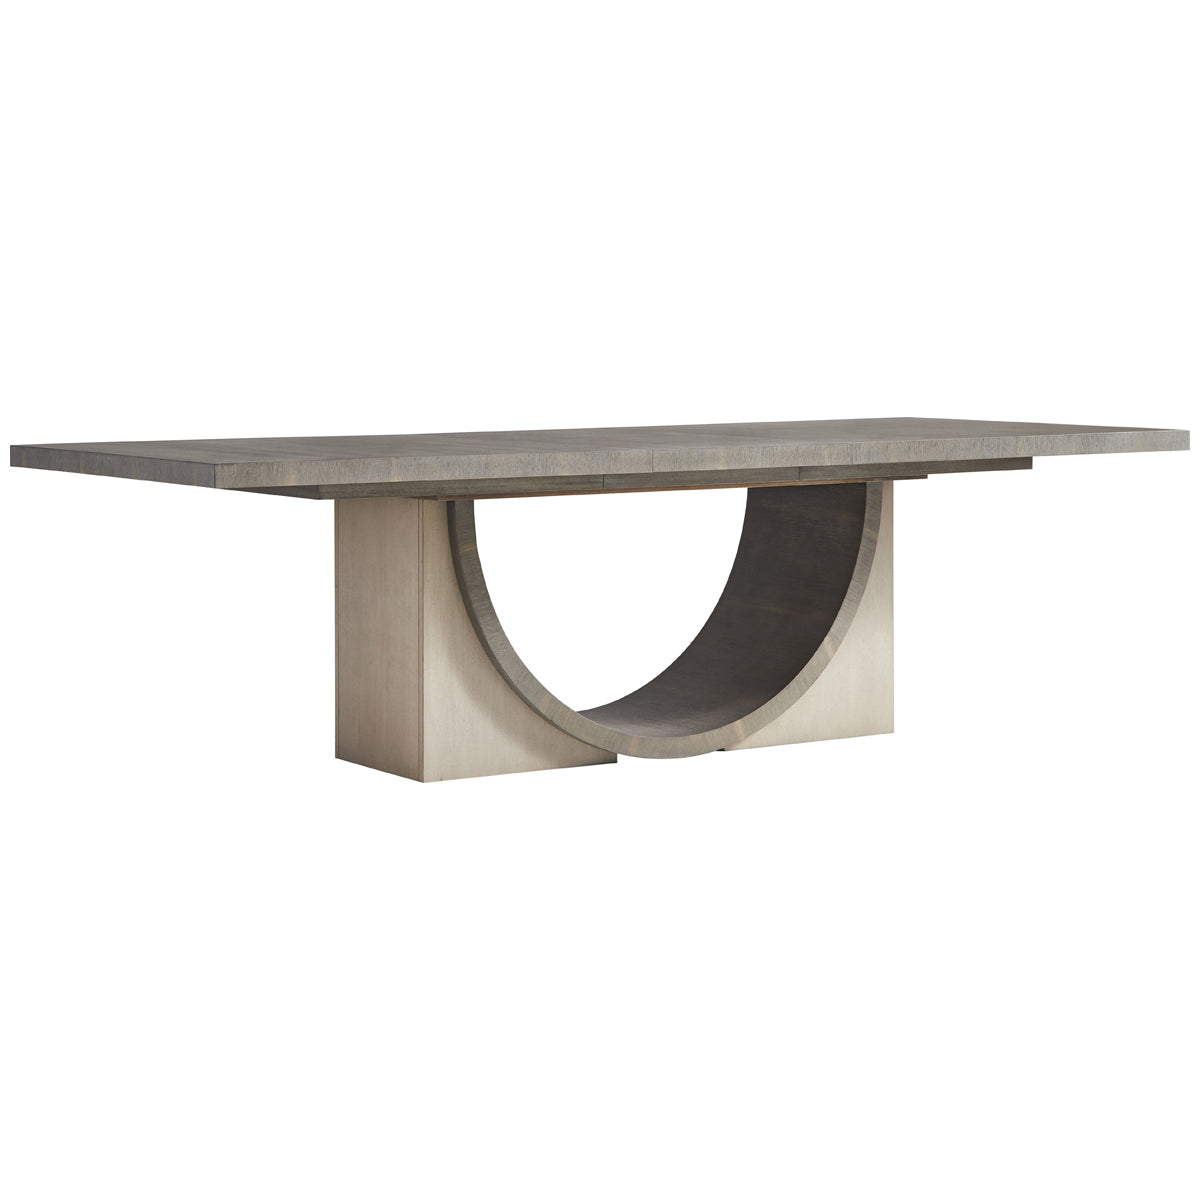 Vanguard Furniture Cove Dining Table